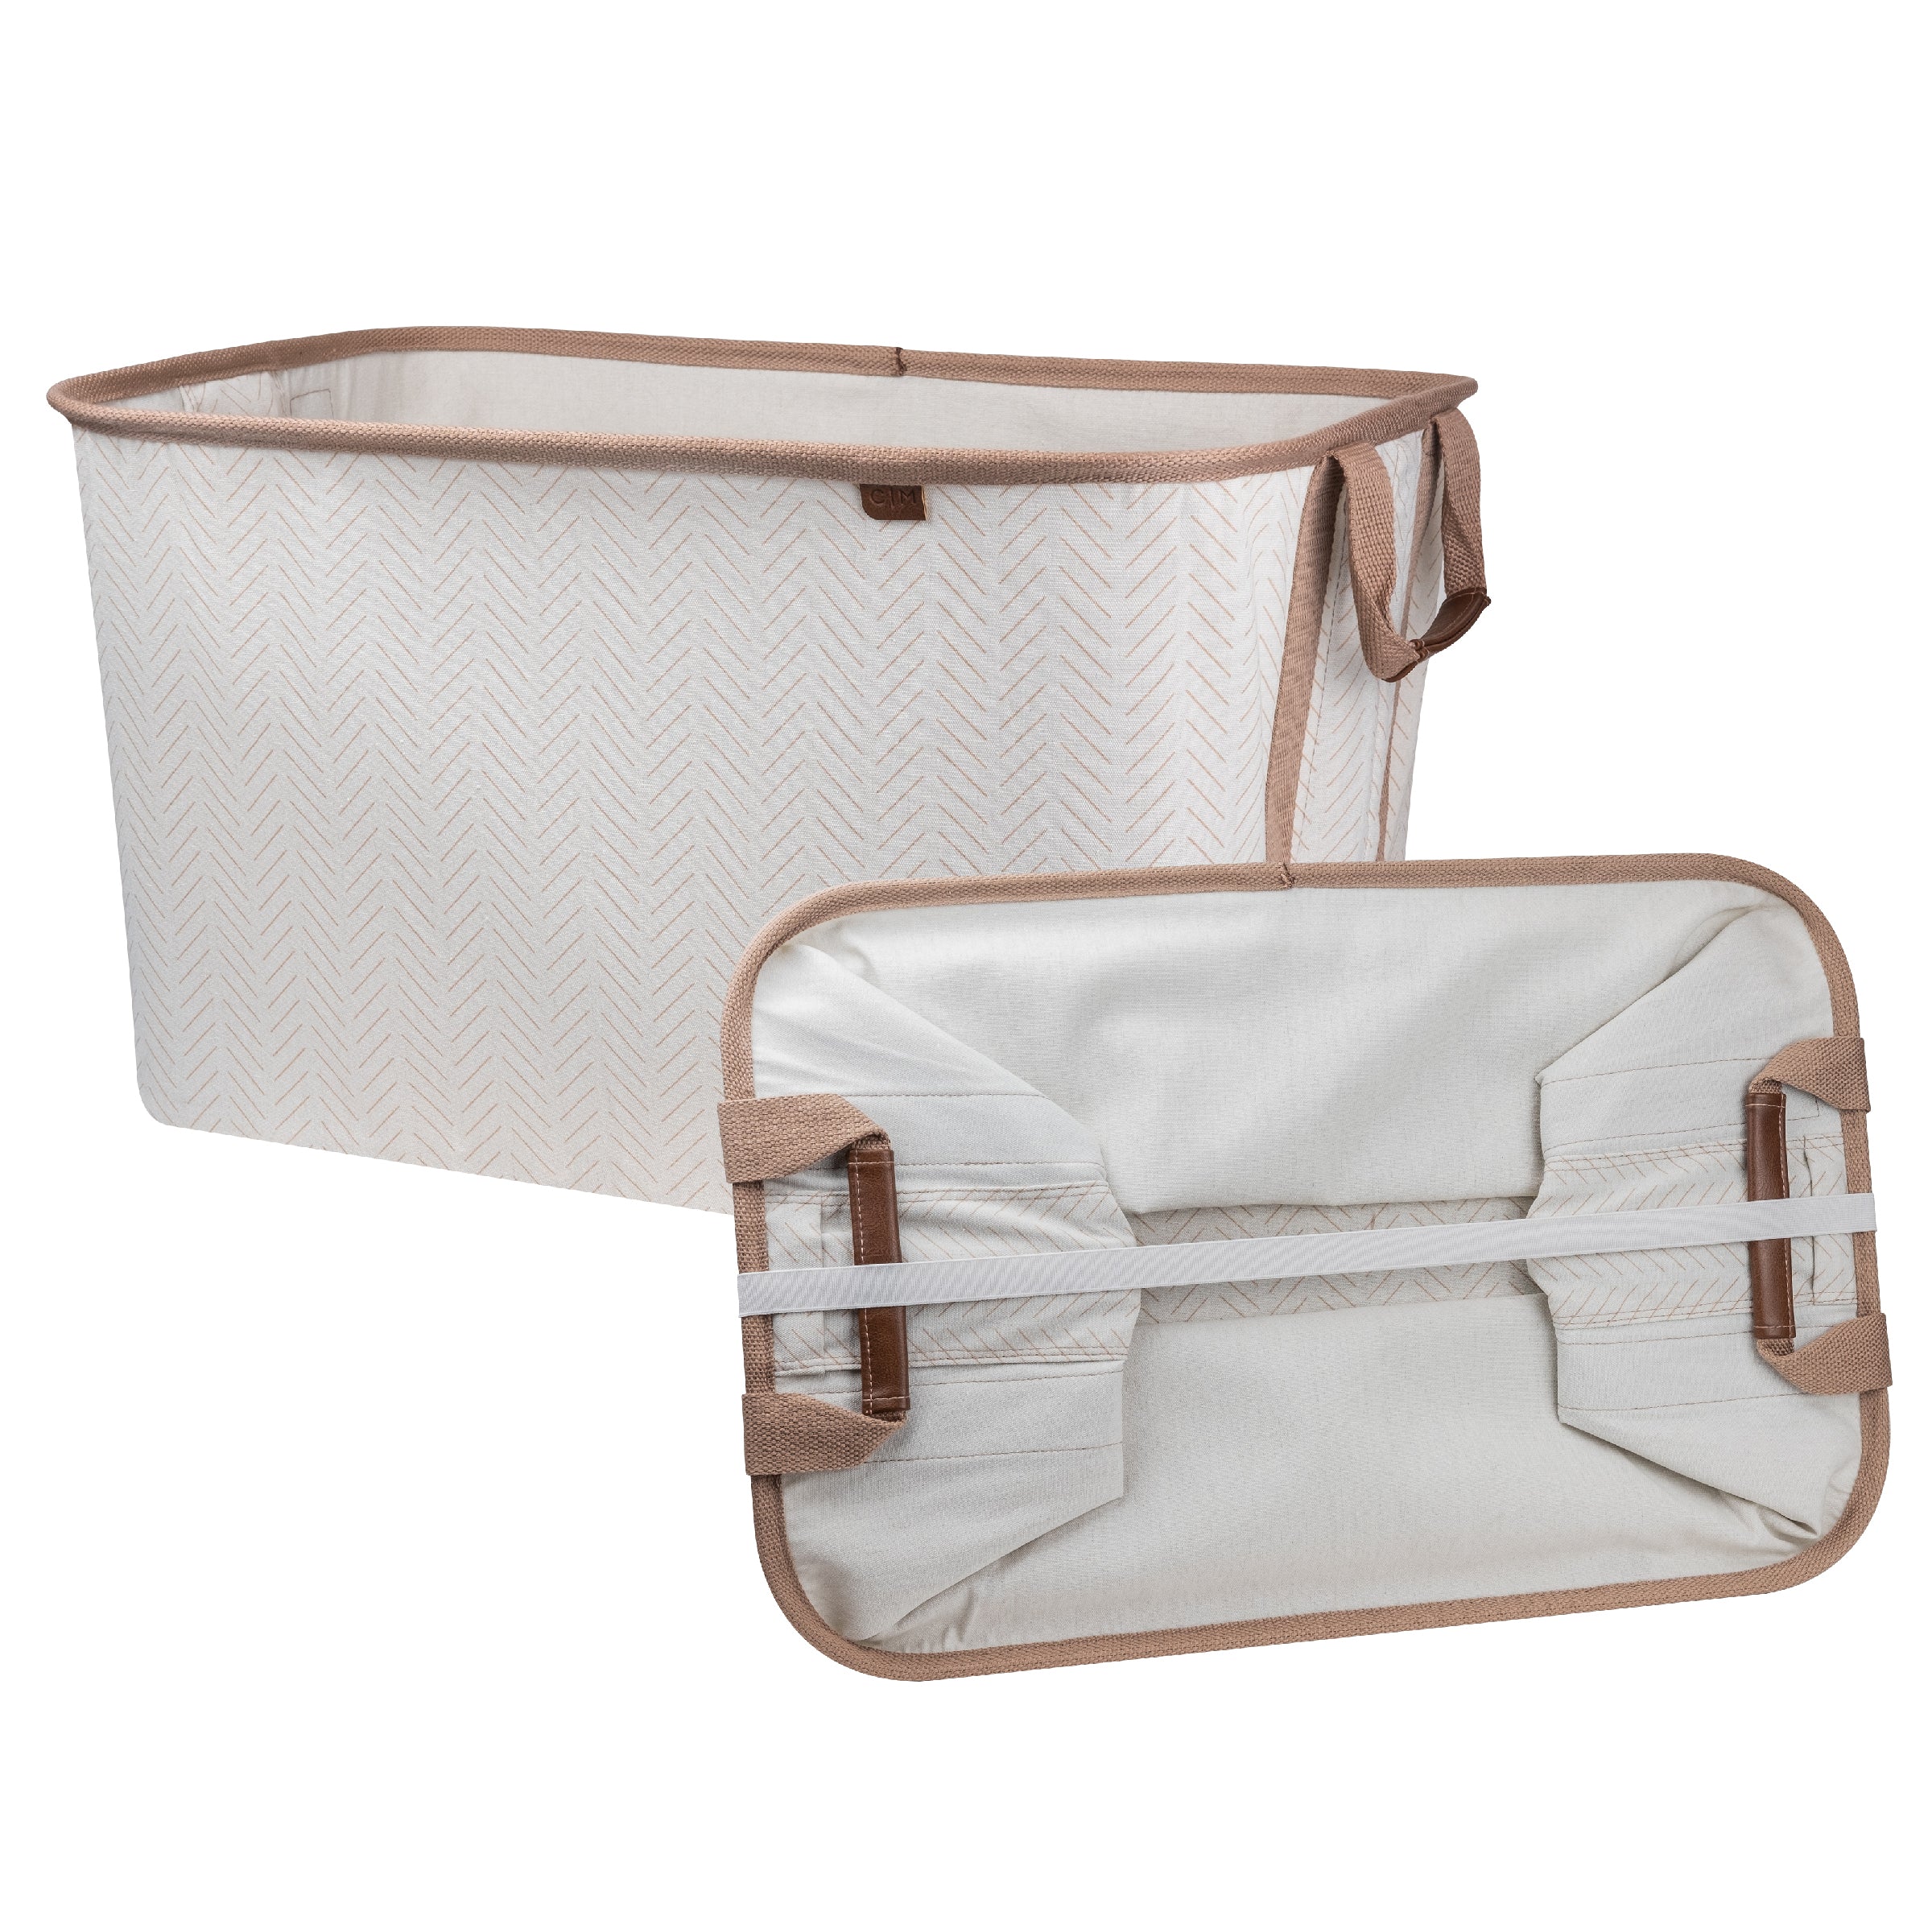 Clevermade Large Collapsible Laundry Basket 2-Pack